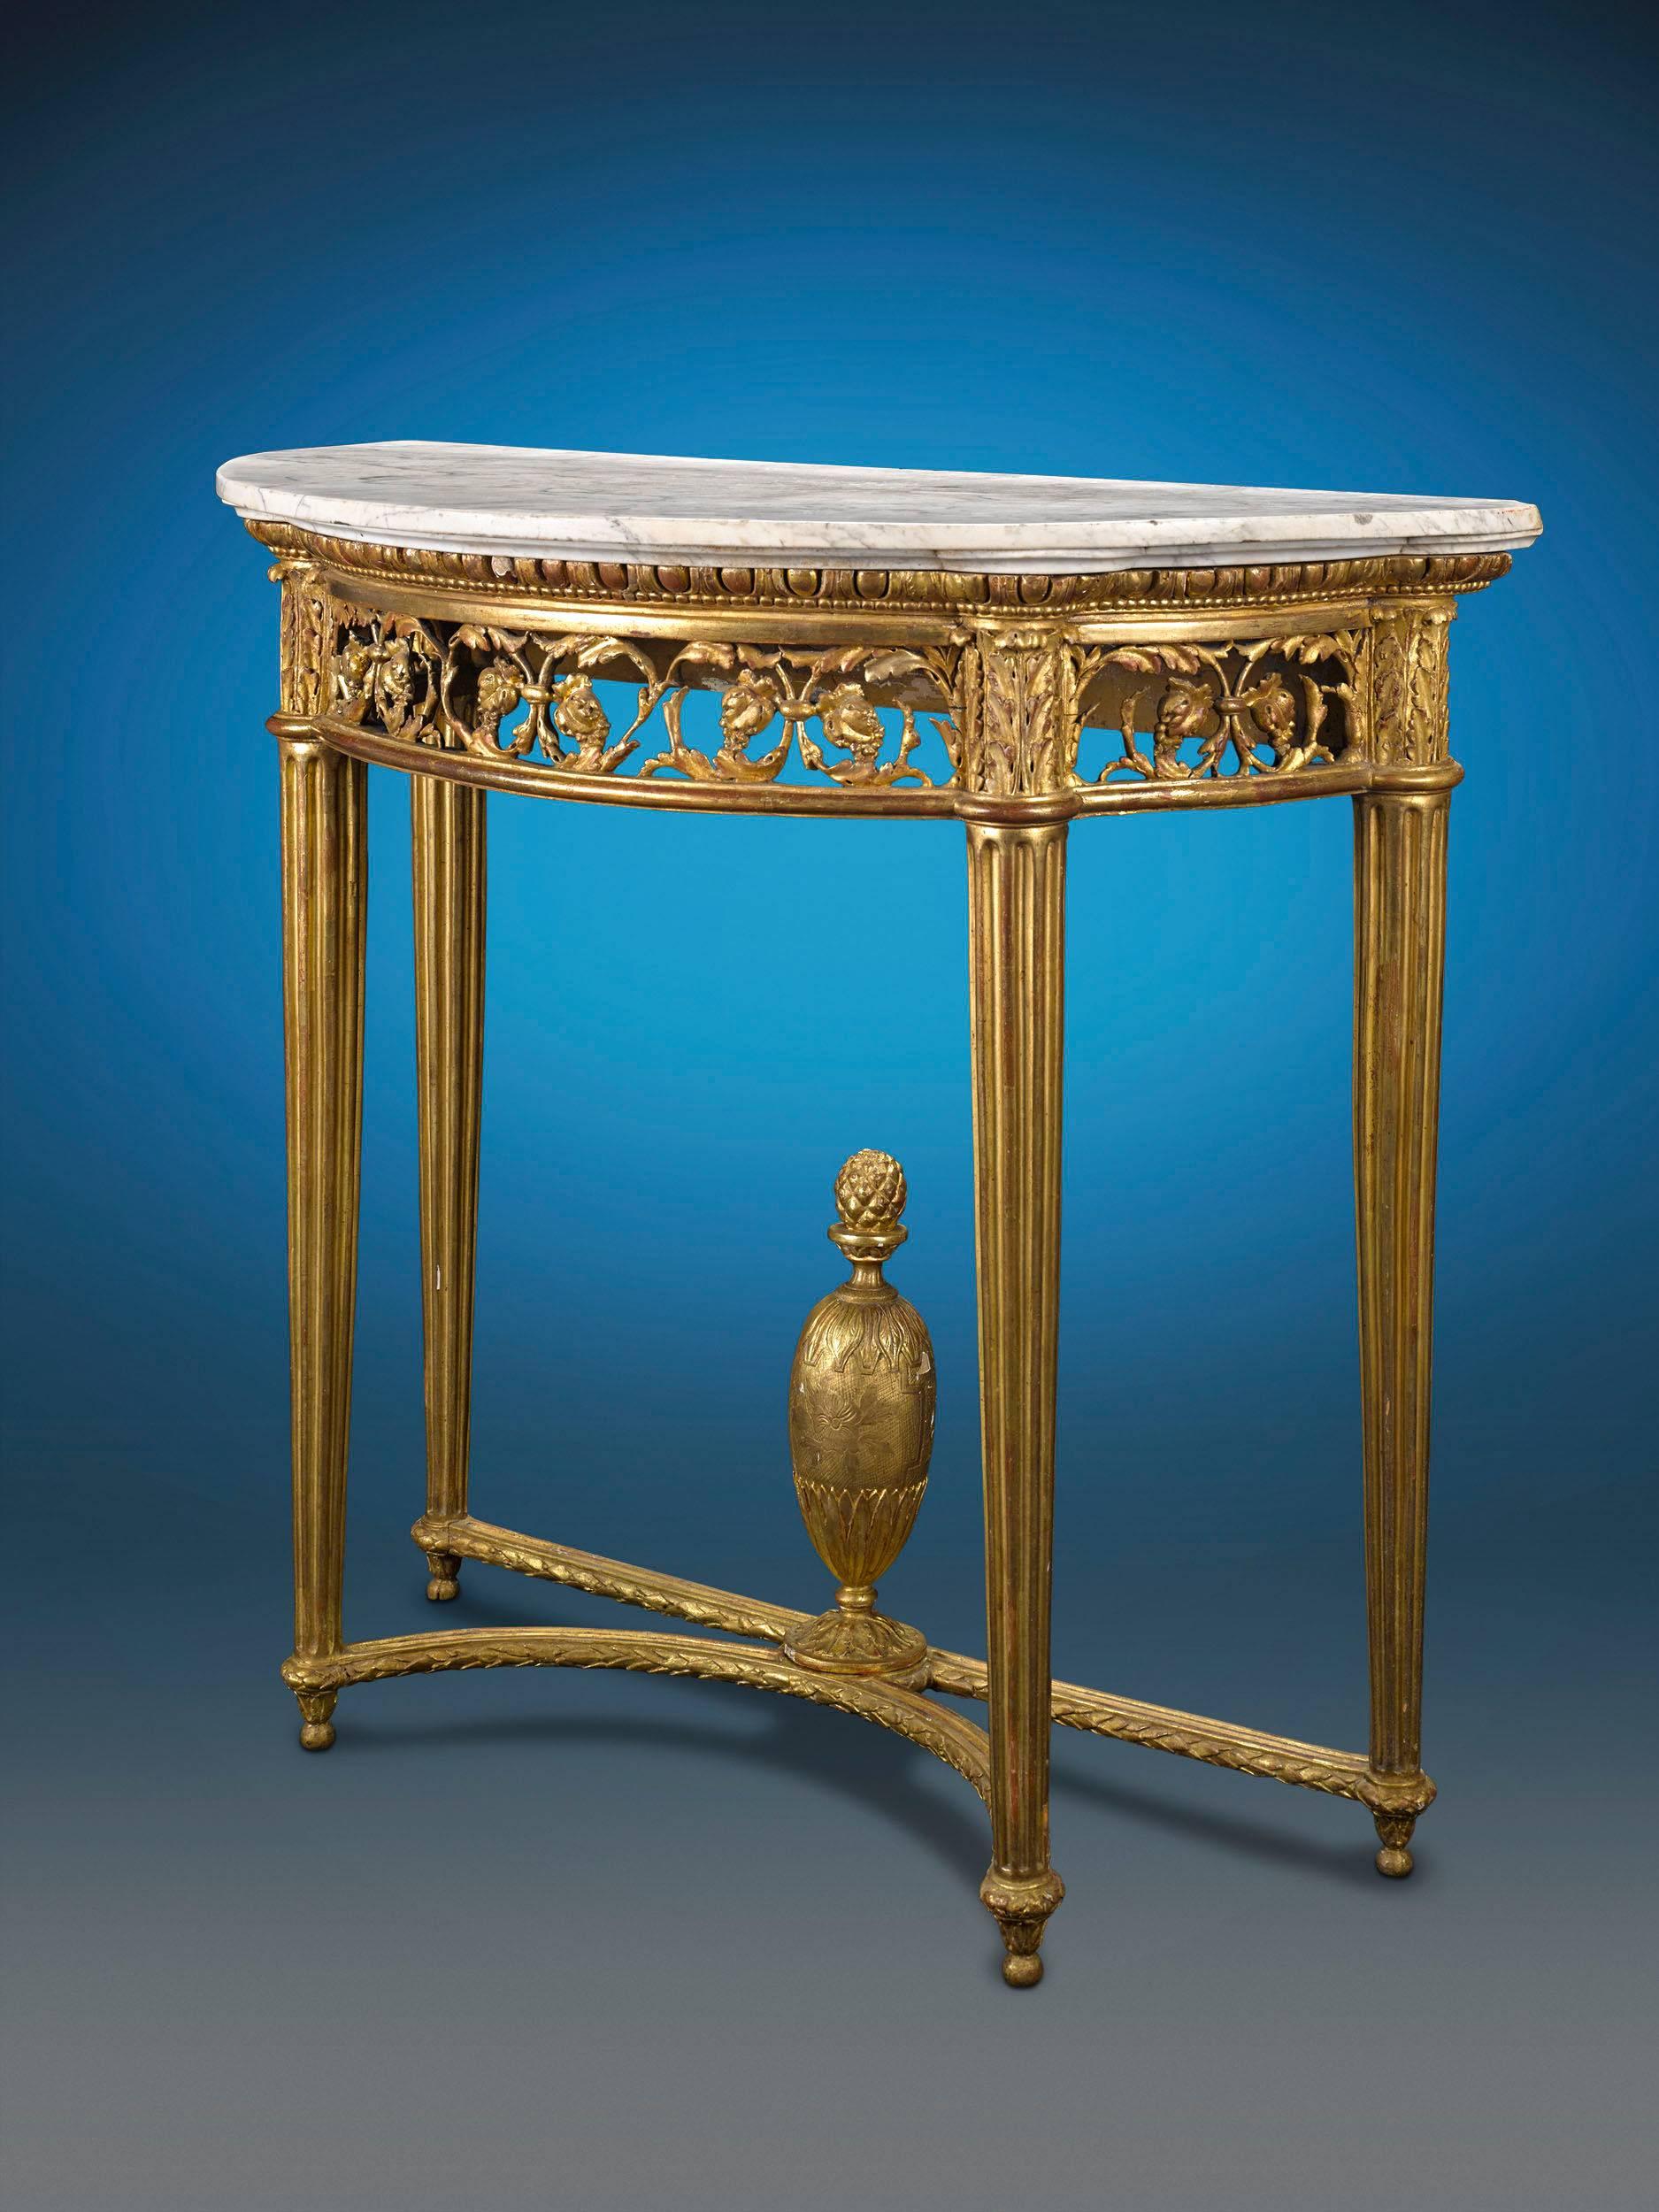 Fashioned in the Louis XVI style, this magnificent French console table has an opulent but classical feel. Crafted of luxurious giltwood with a marble top, this half-moon table is bedecked with Neoclassical mounts that accent the table's intricate